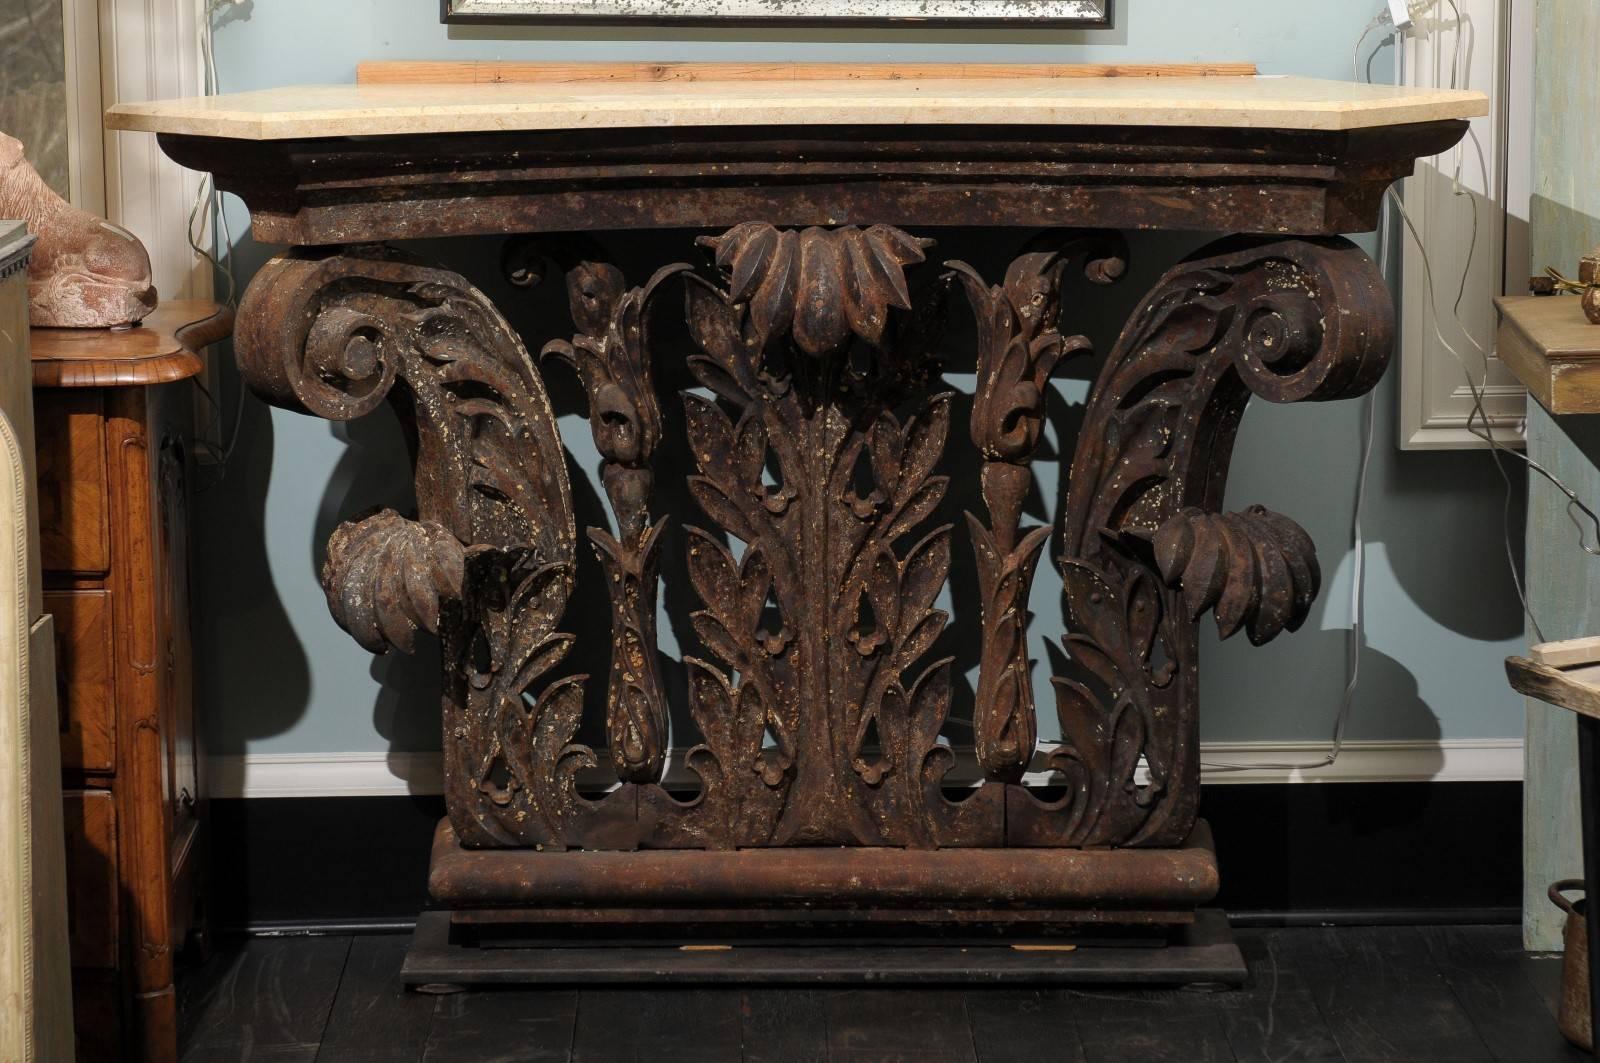 A fantastic iron architectural Corinthian capital fragment from a New York building made into a console table. A custom travertine top has been added. (Travertine looks a lot like marble). This early 20th century architectural piece features its